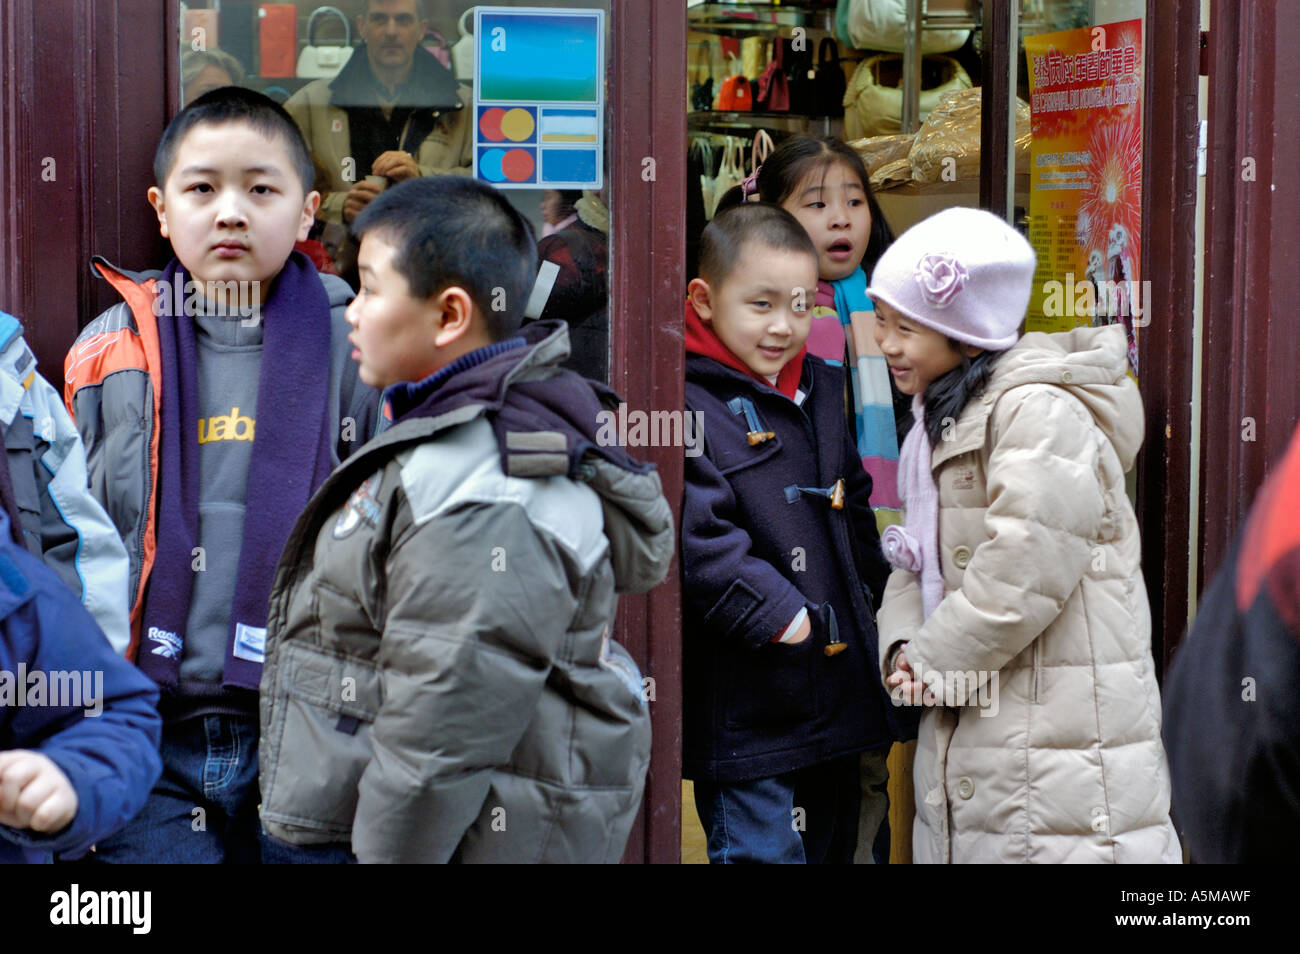 Paris France, Small Crowd Chinese French Children Celebrating 'Chinese New Year' on Street Festival Outside Family Store Portrait Stock Photo